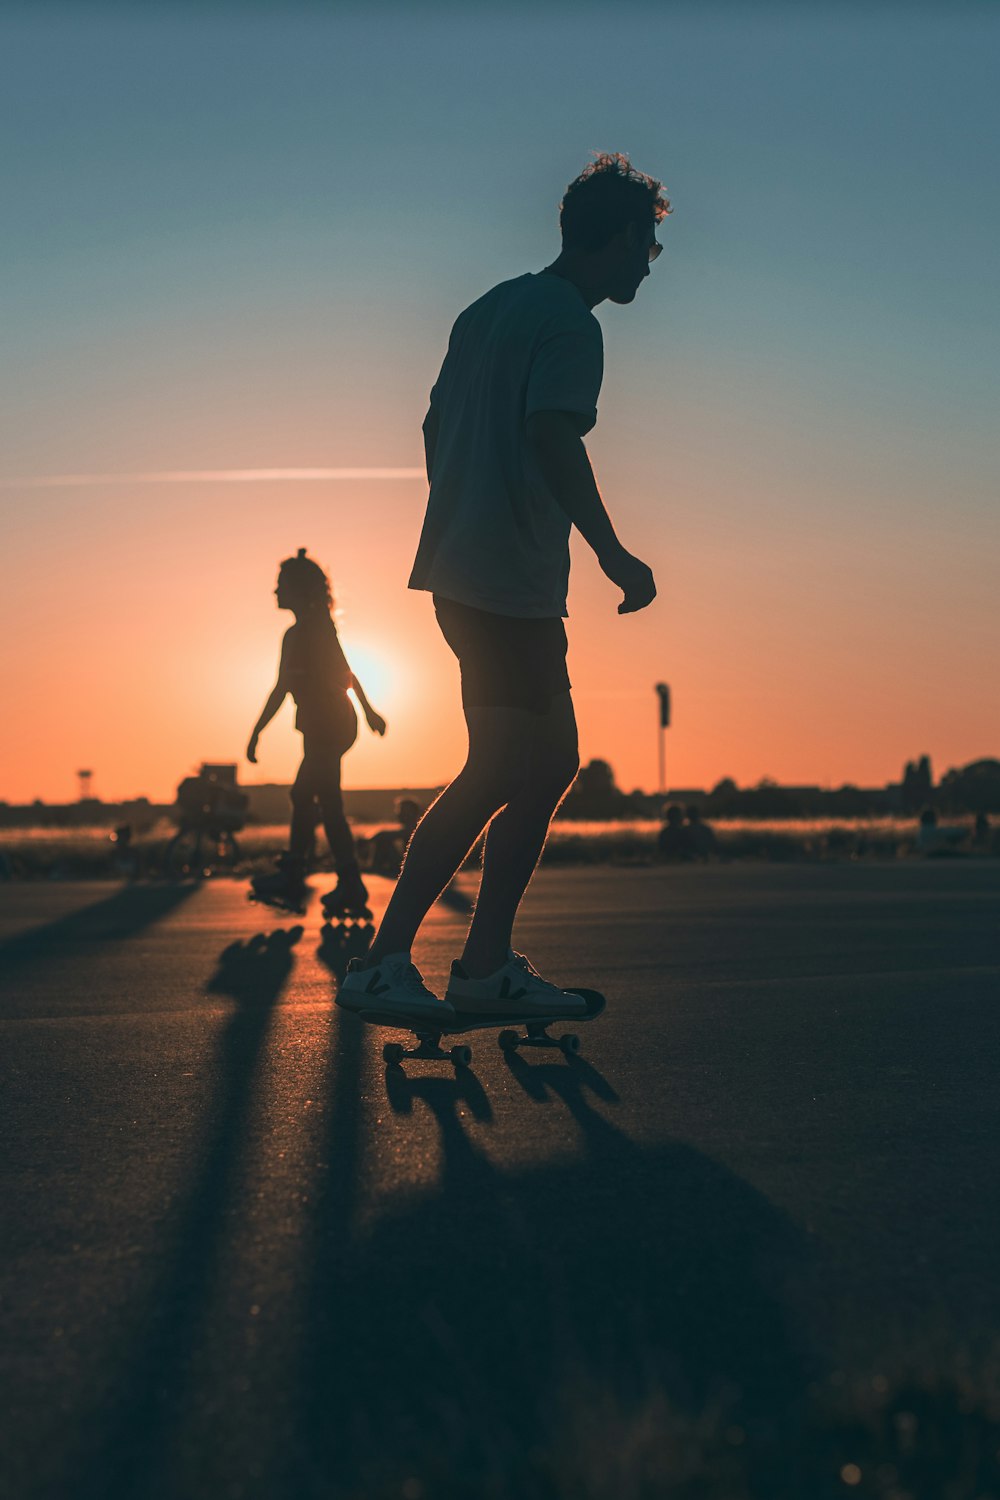 a man and a woman walking on a road at sunset